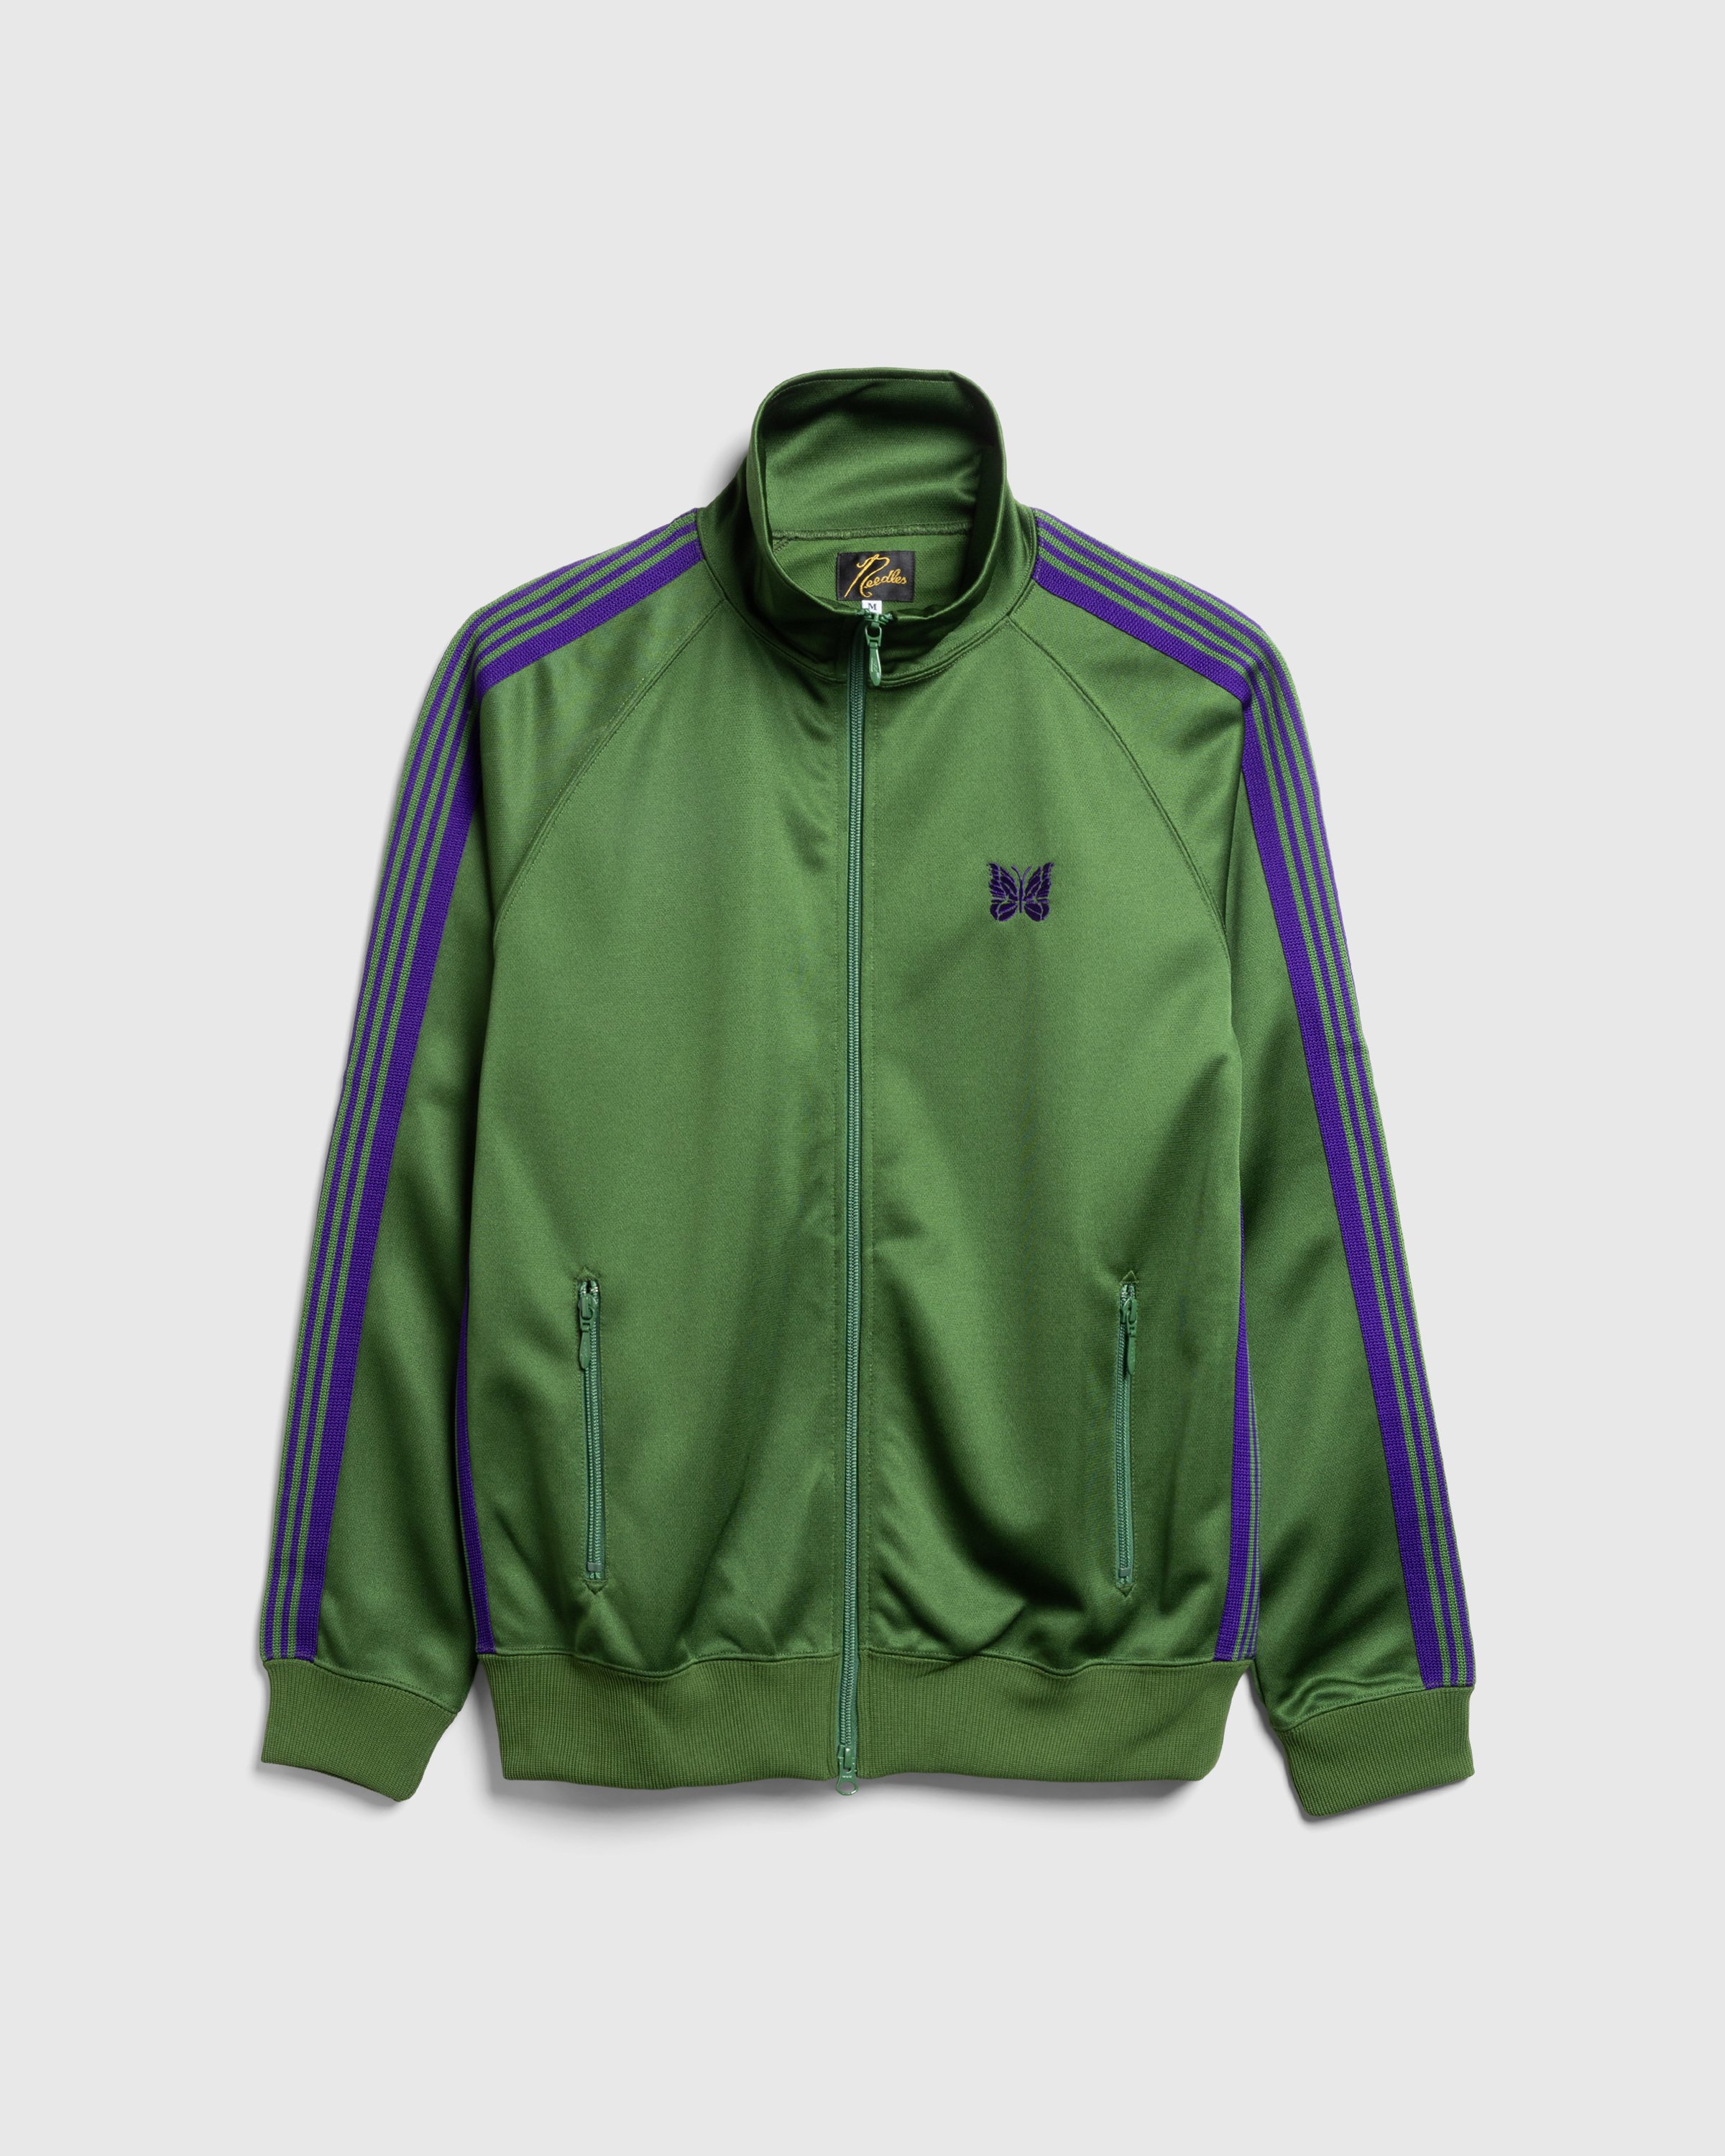 Needles poly track jacket teal green M - トップス